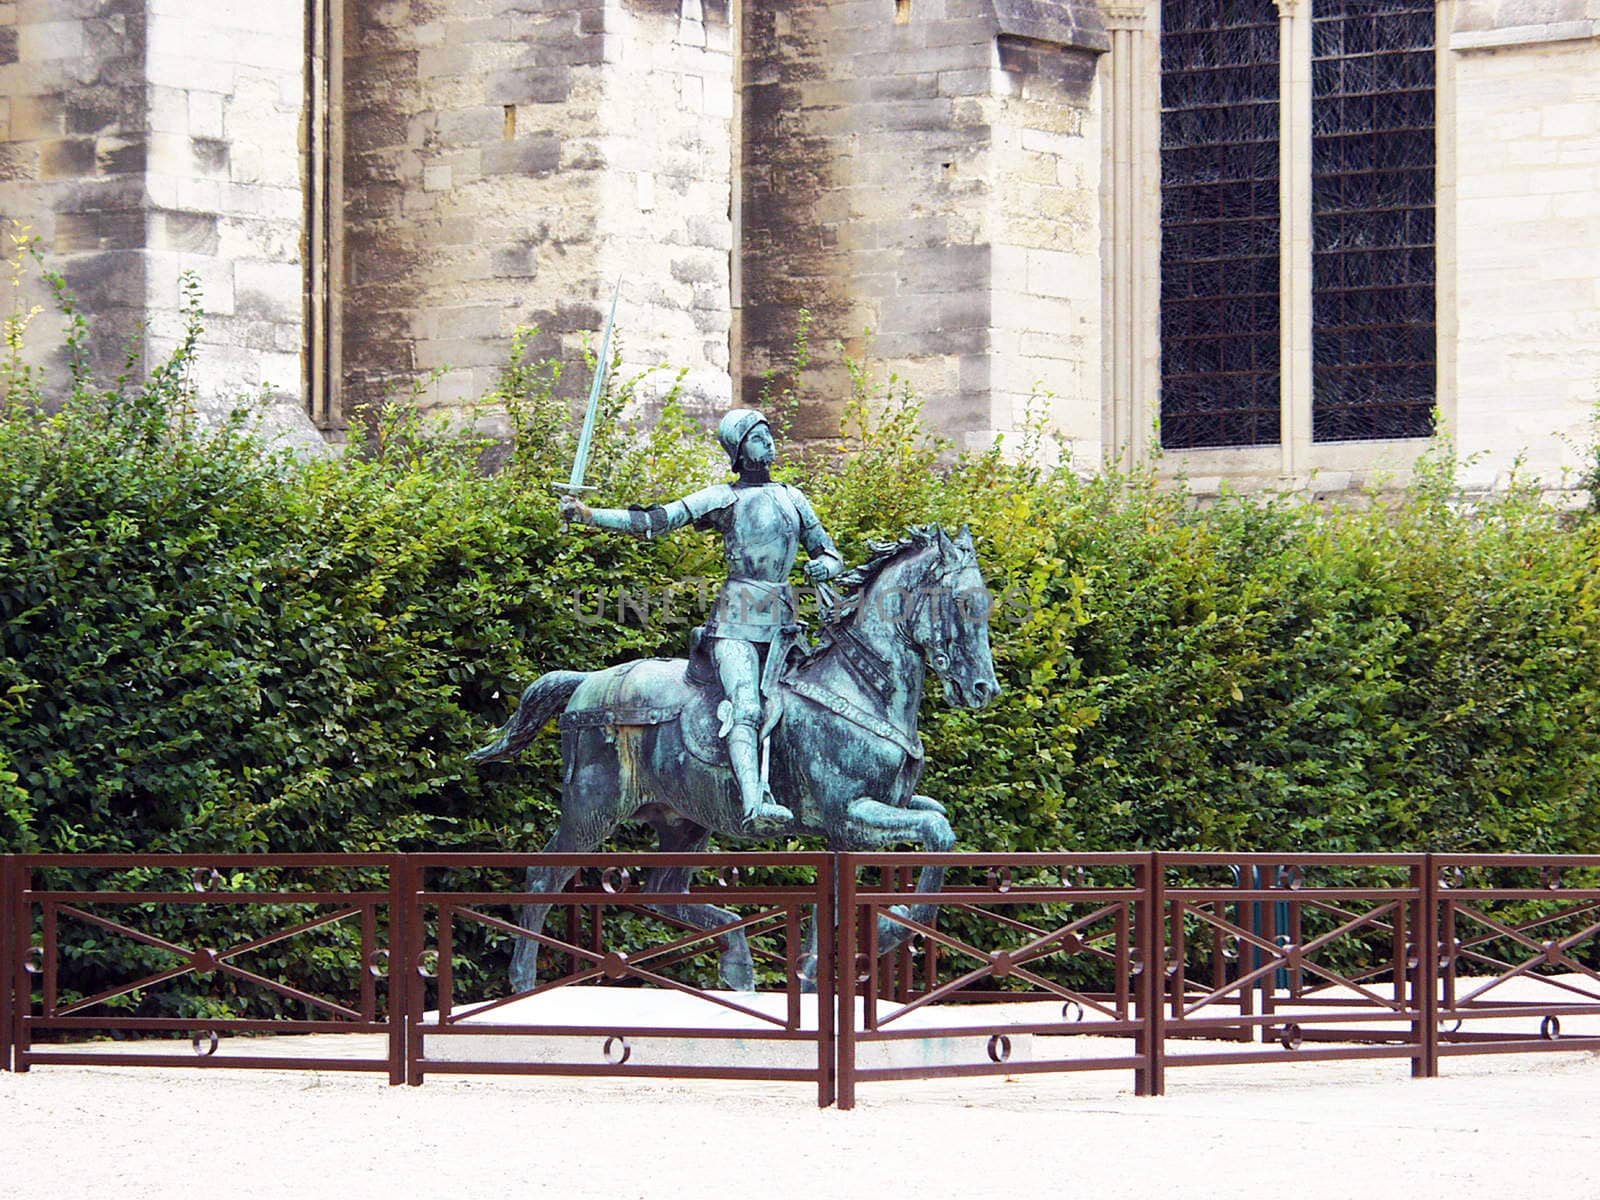 Statue of Saint Joan of Arc in Reims. France  by NickNick